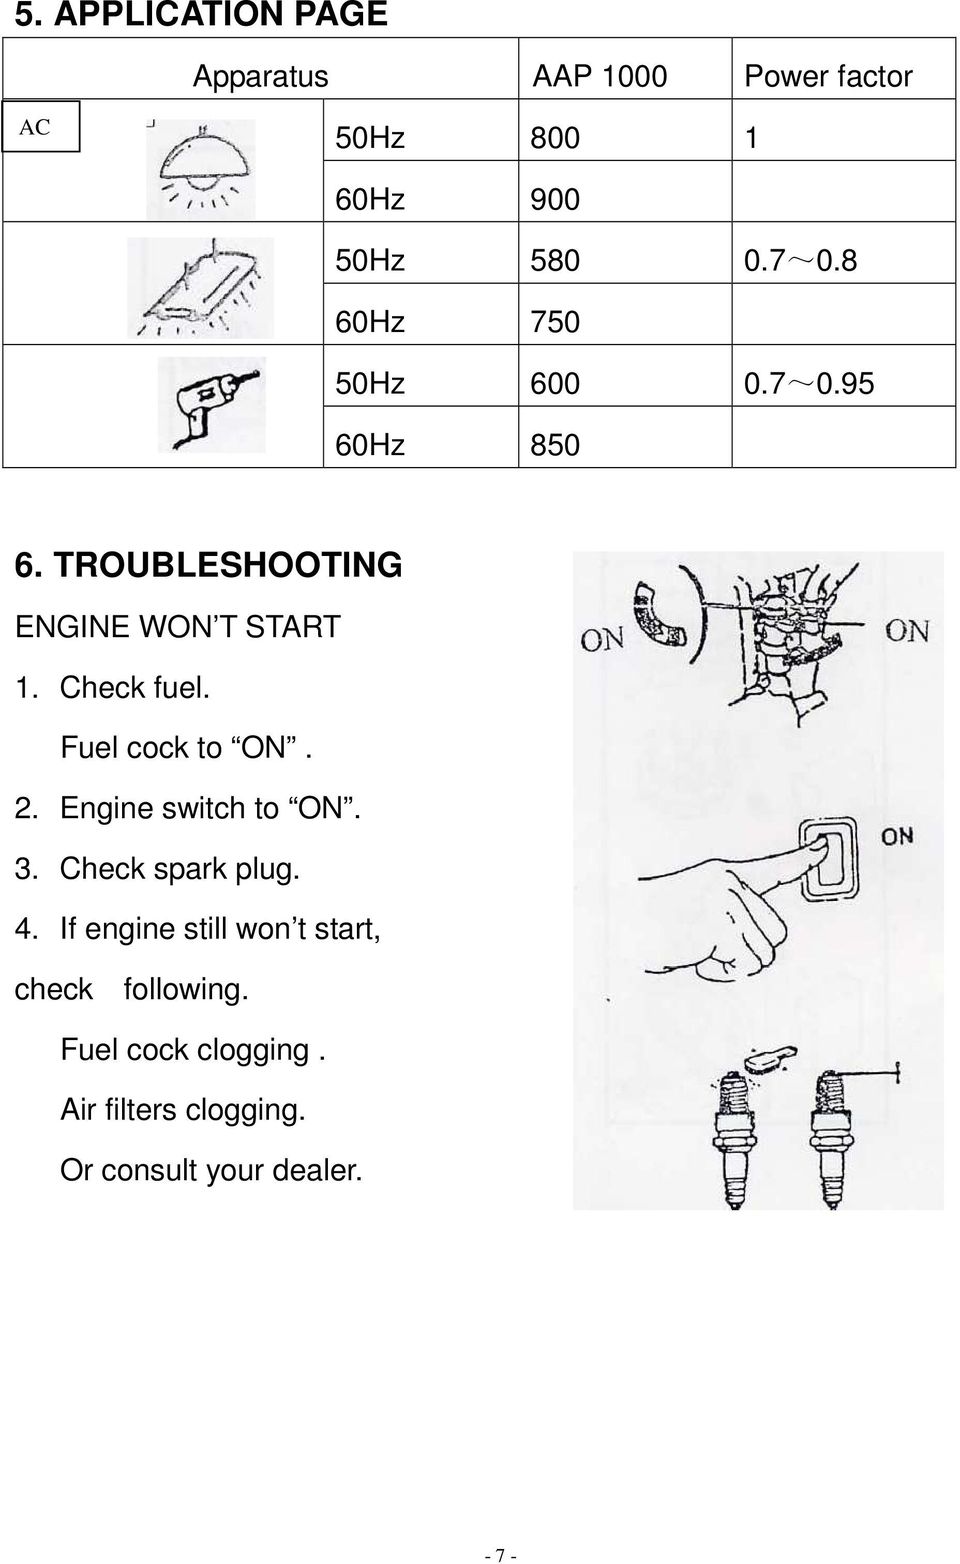 Fuel cock to ON. 2. Engine switch to ON. 3. Check spark plug. 4.